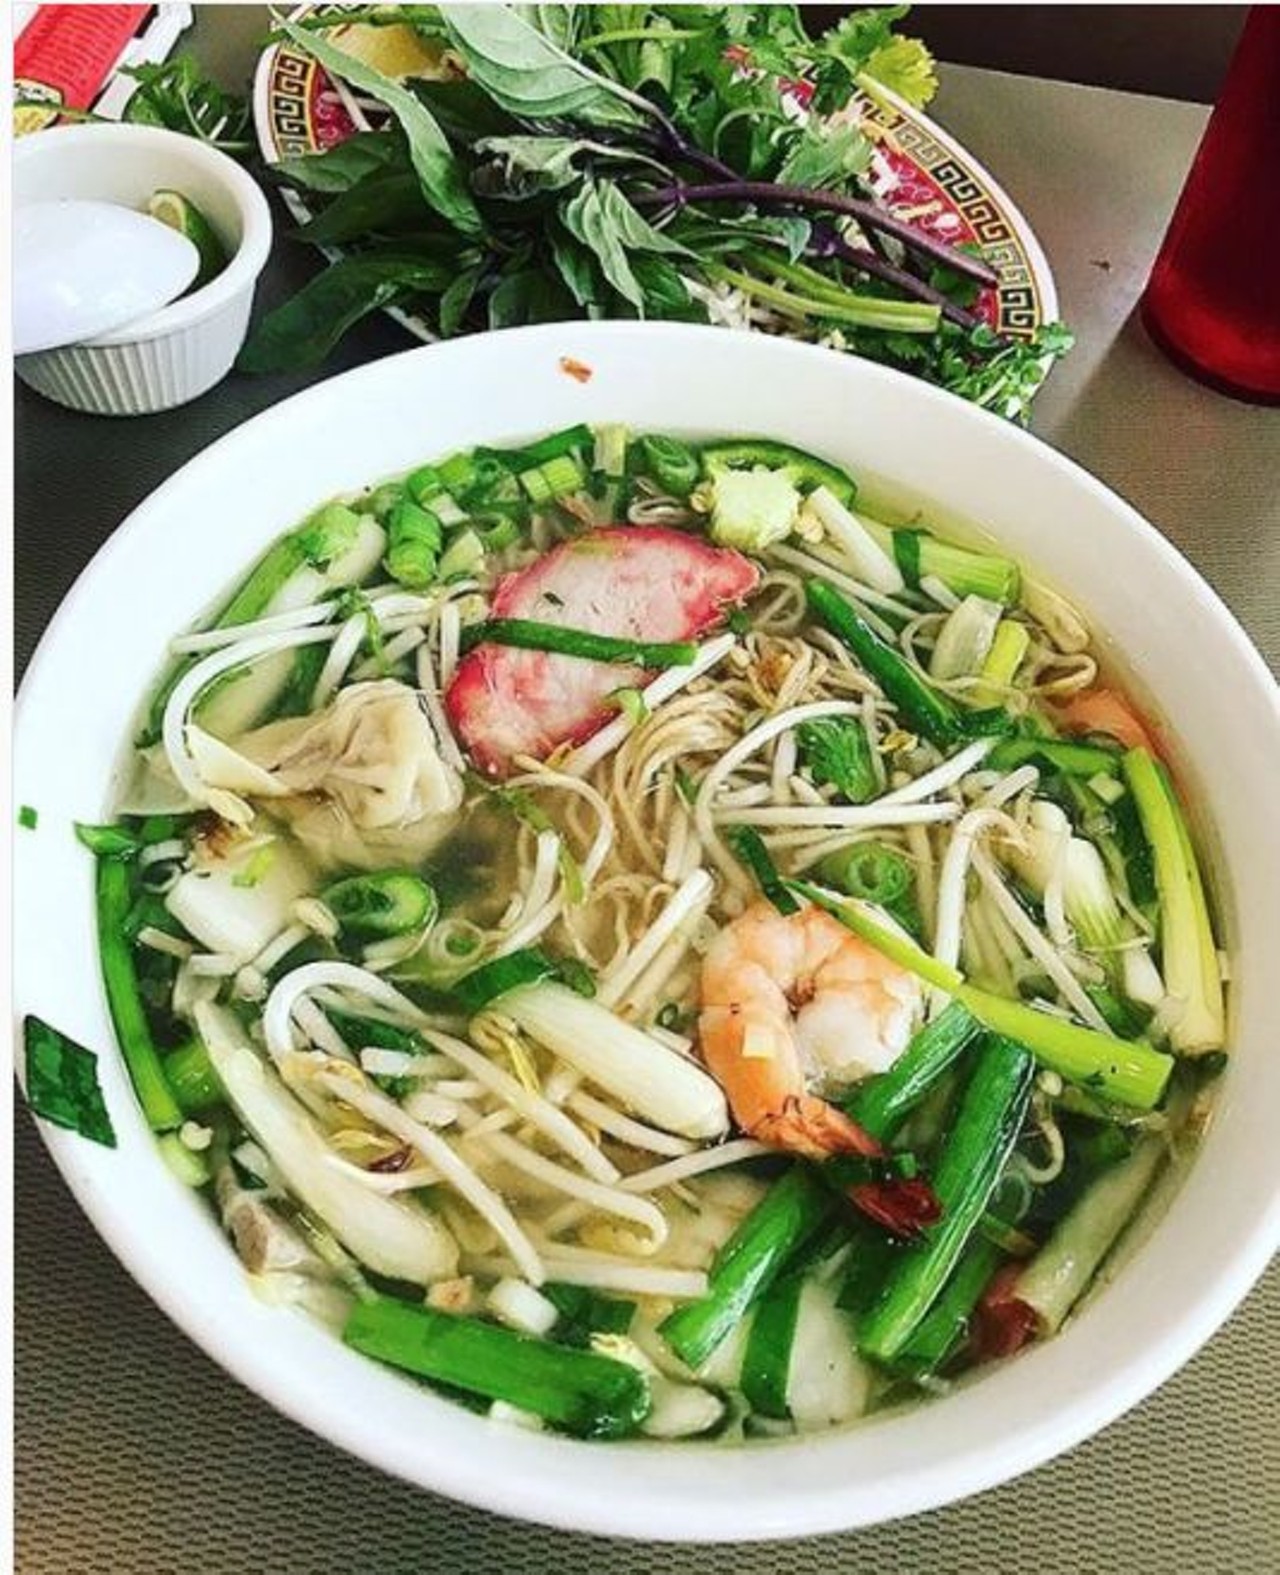 Pho Thien An
126 W Rector #108, (210) 348-8526
Shop &#145;til you drop and then recharge at Pho Thien An with a loaded bowl of fragrant beef broth and noodles. 
Photo via Instagram,  rudy_airmaxxed